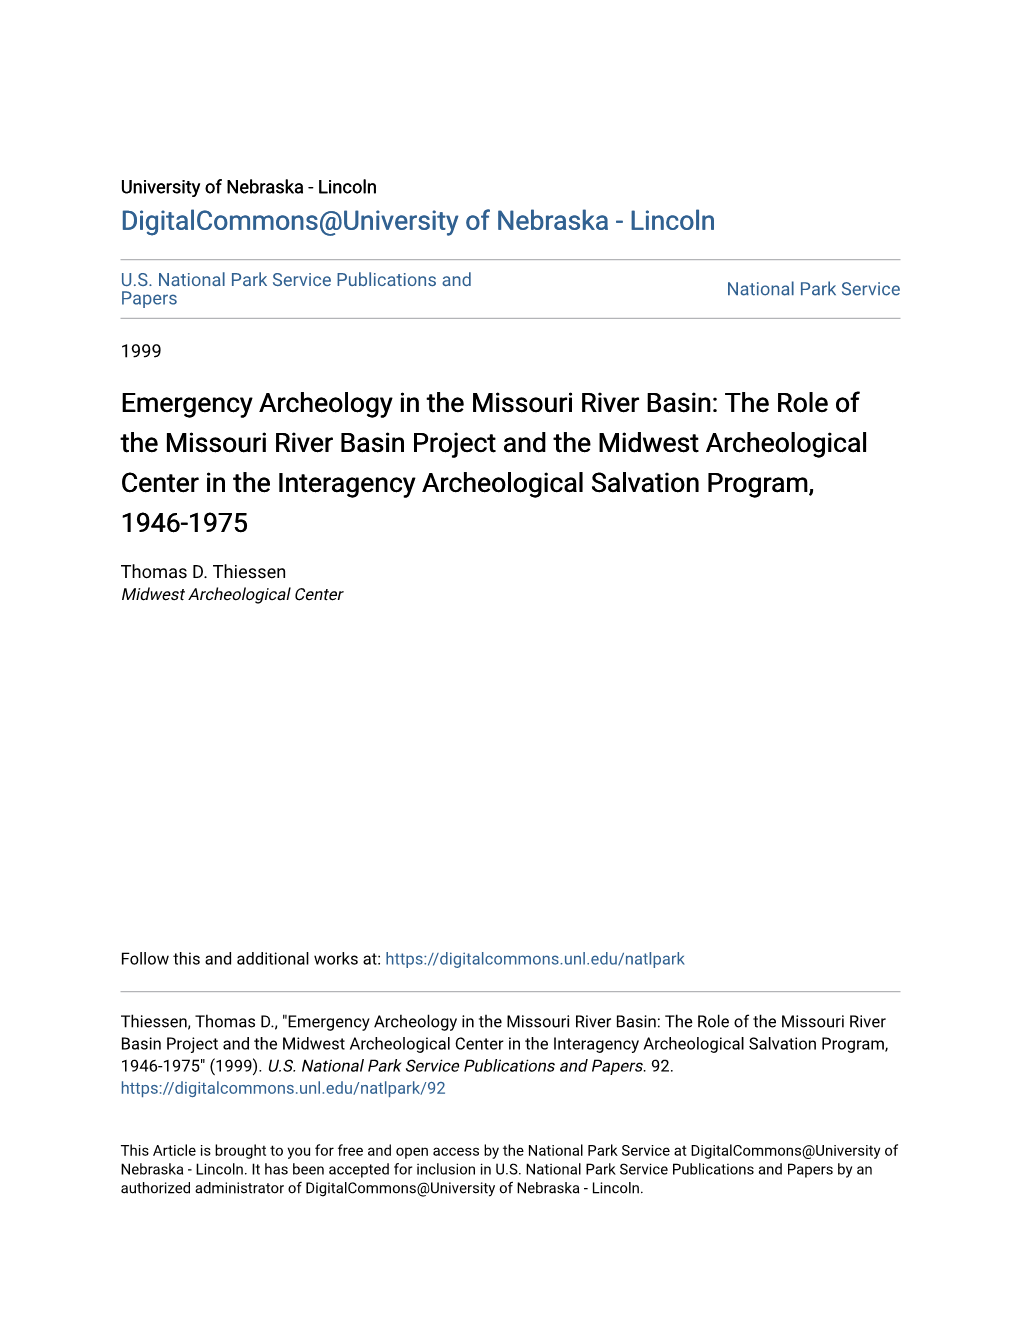 The Role of the Missouri River Basin Project and the Midwest Archeological Center in the Interagency Archeological Salvation Program, 1946-1975